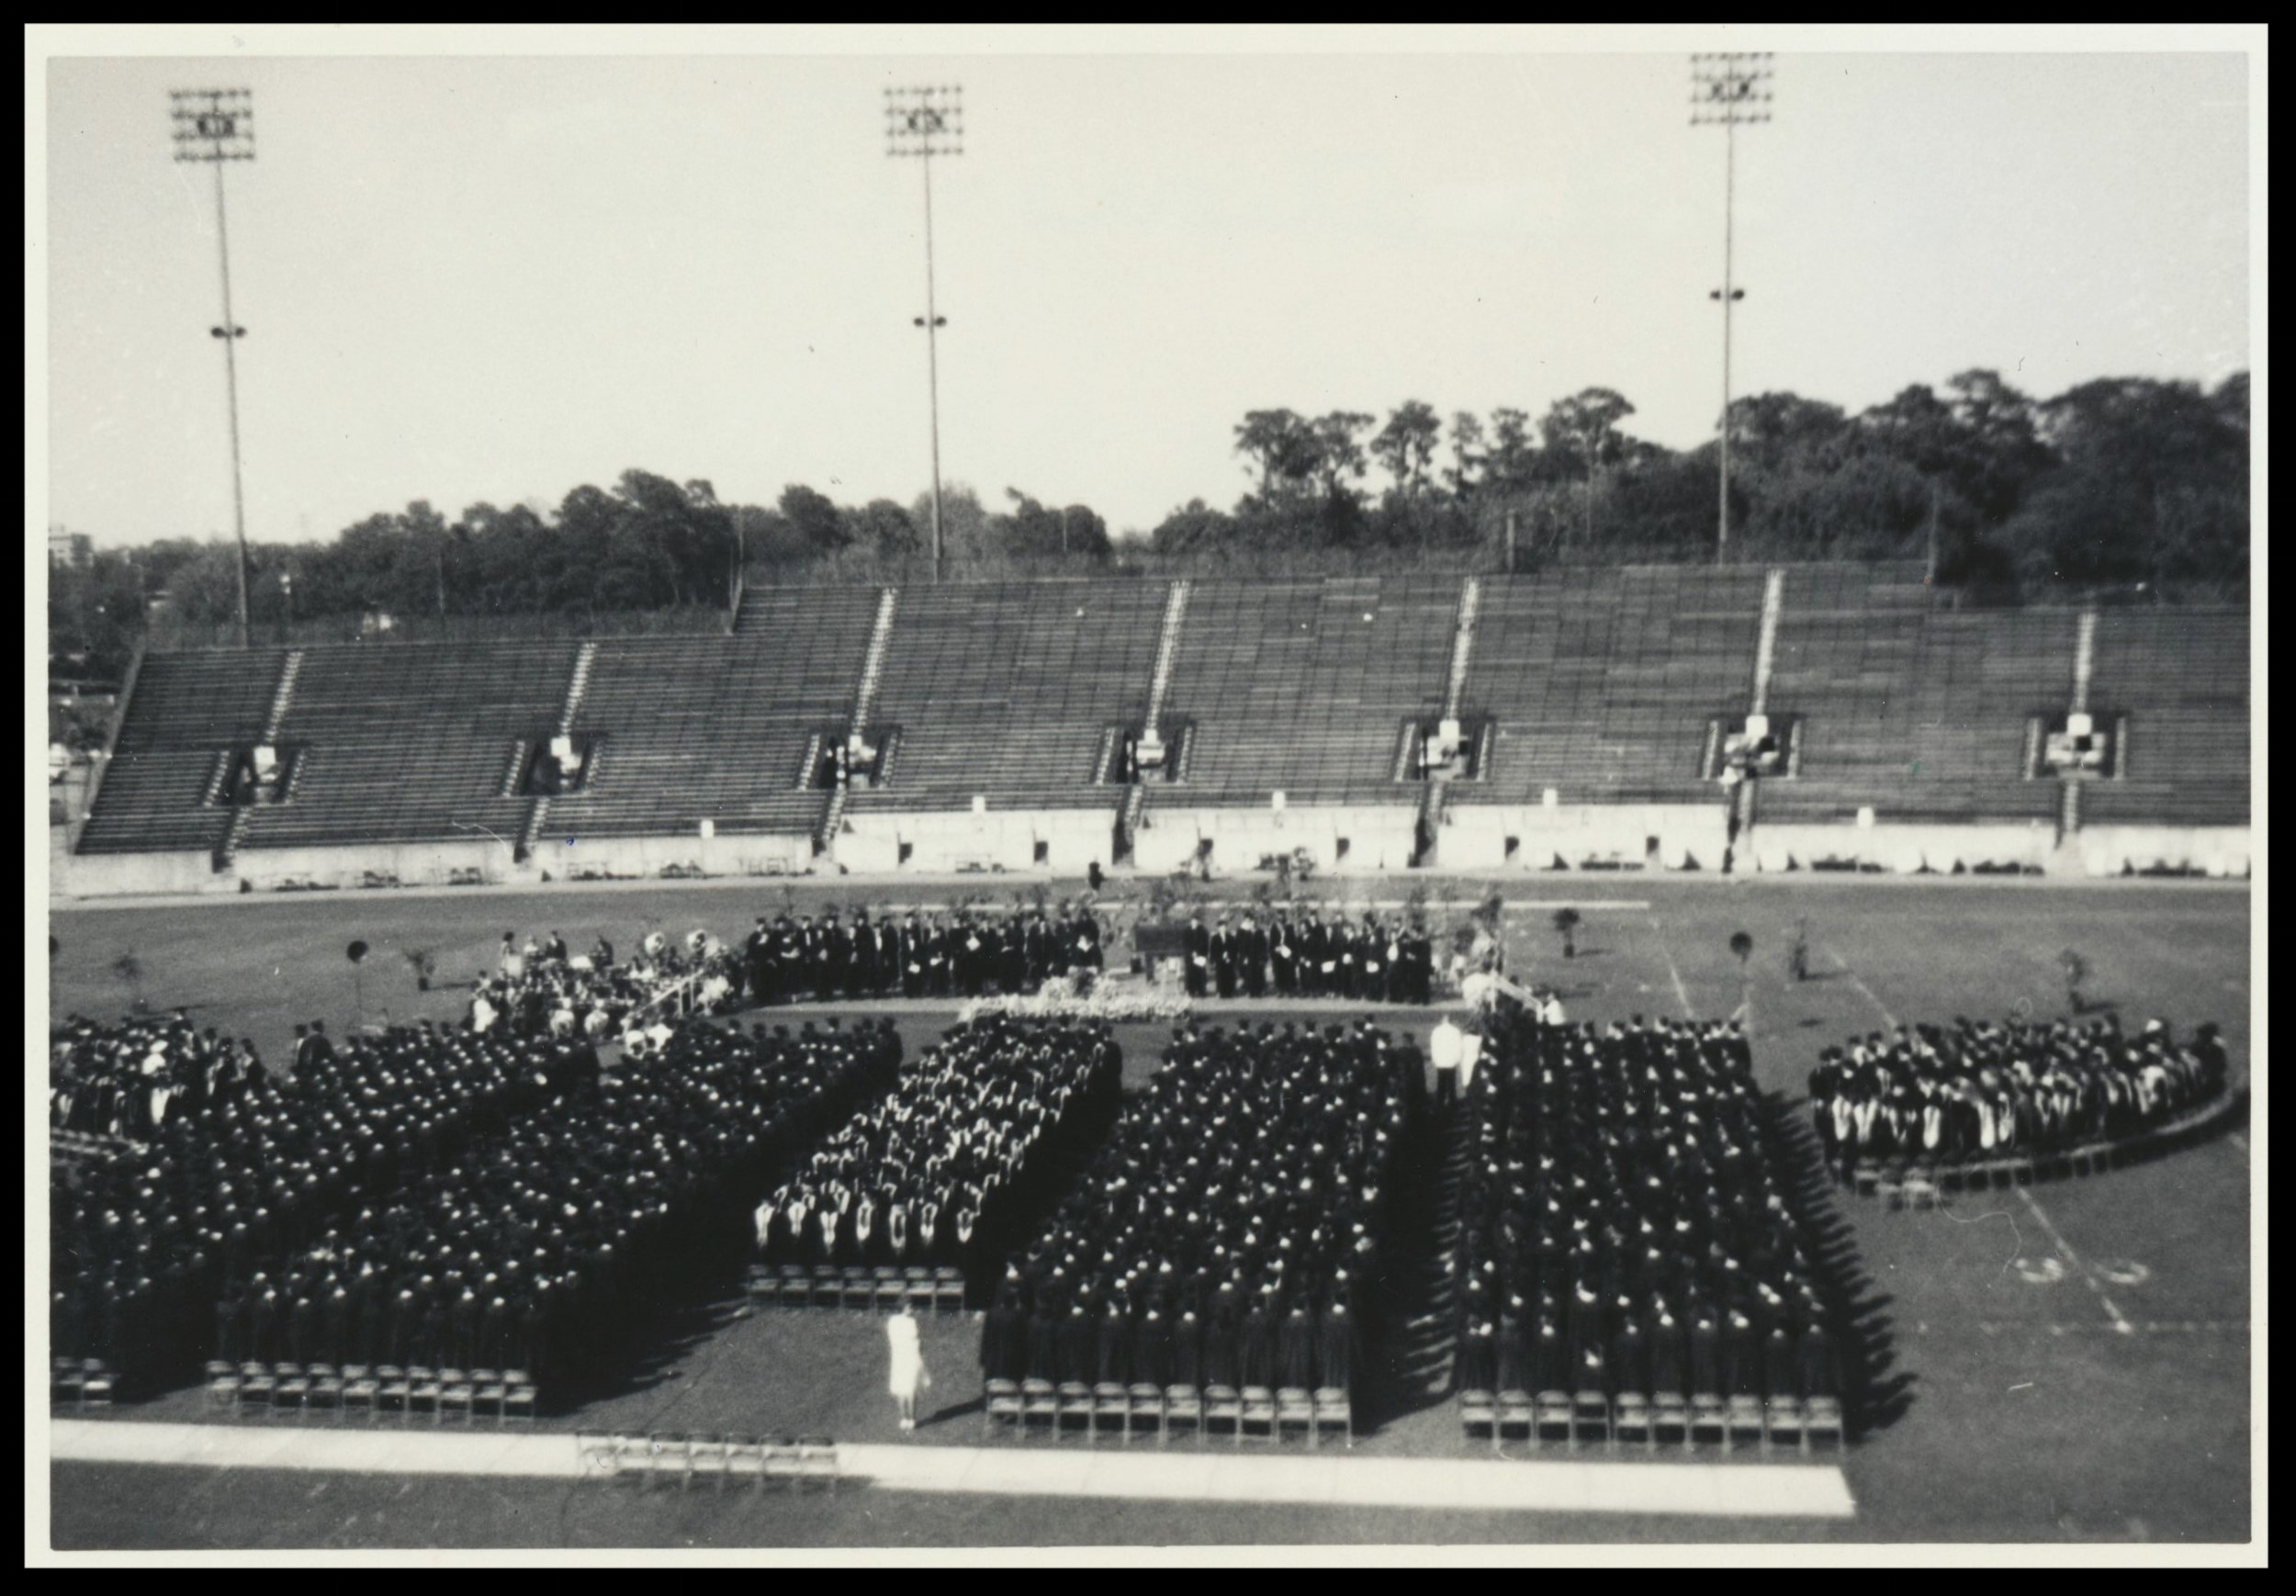 Dr. Young's Graduation Ceremony